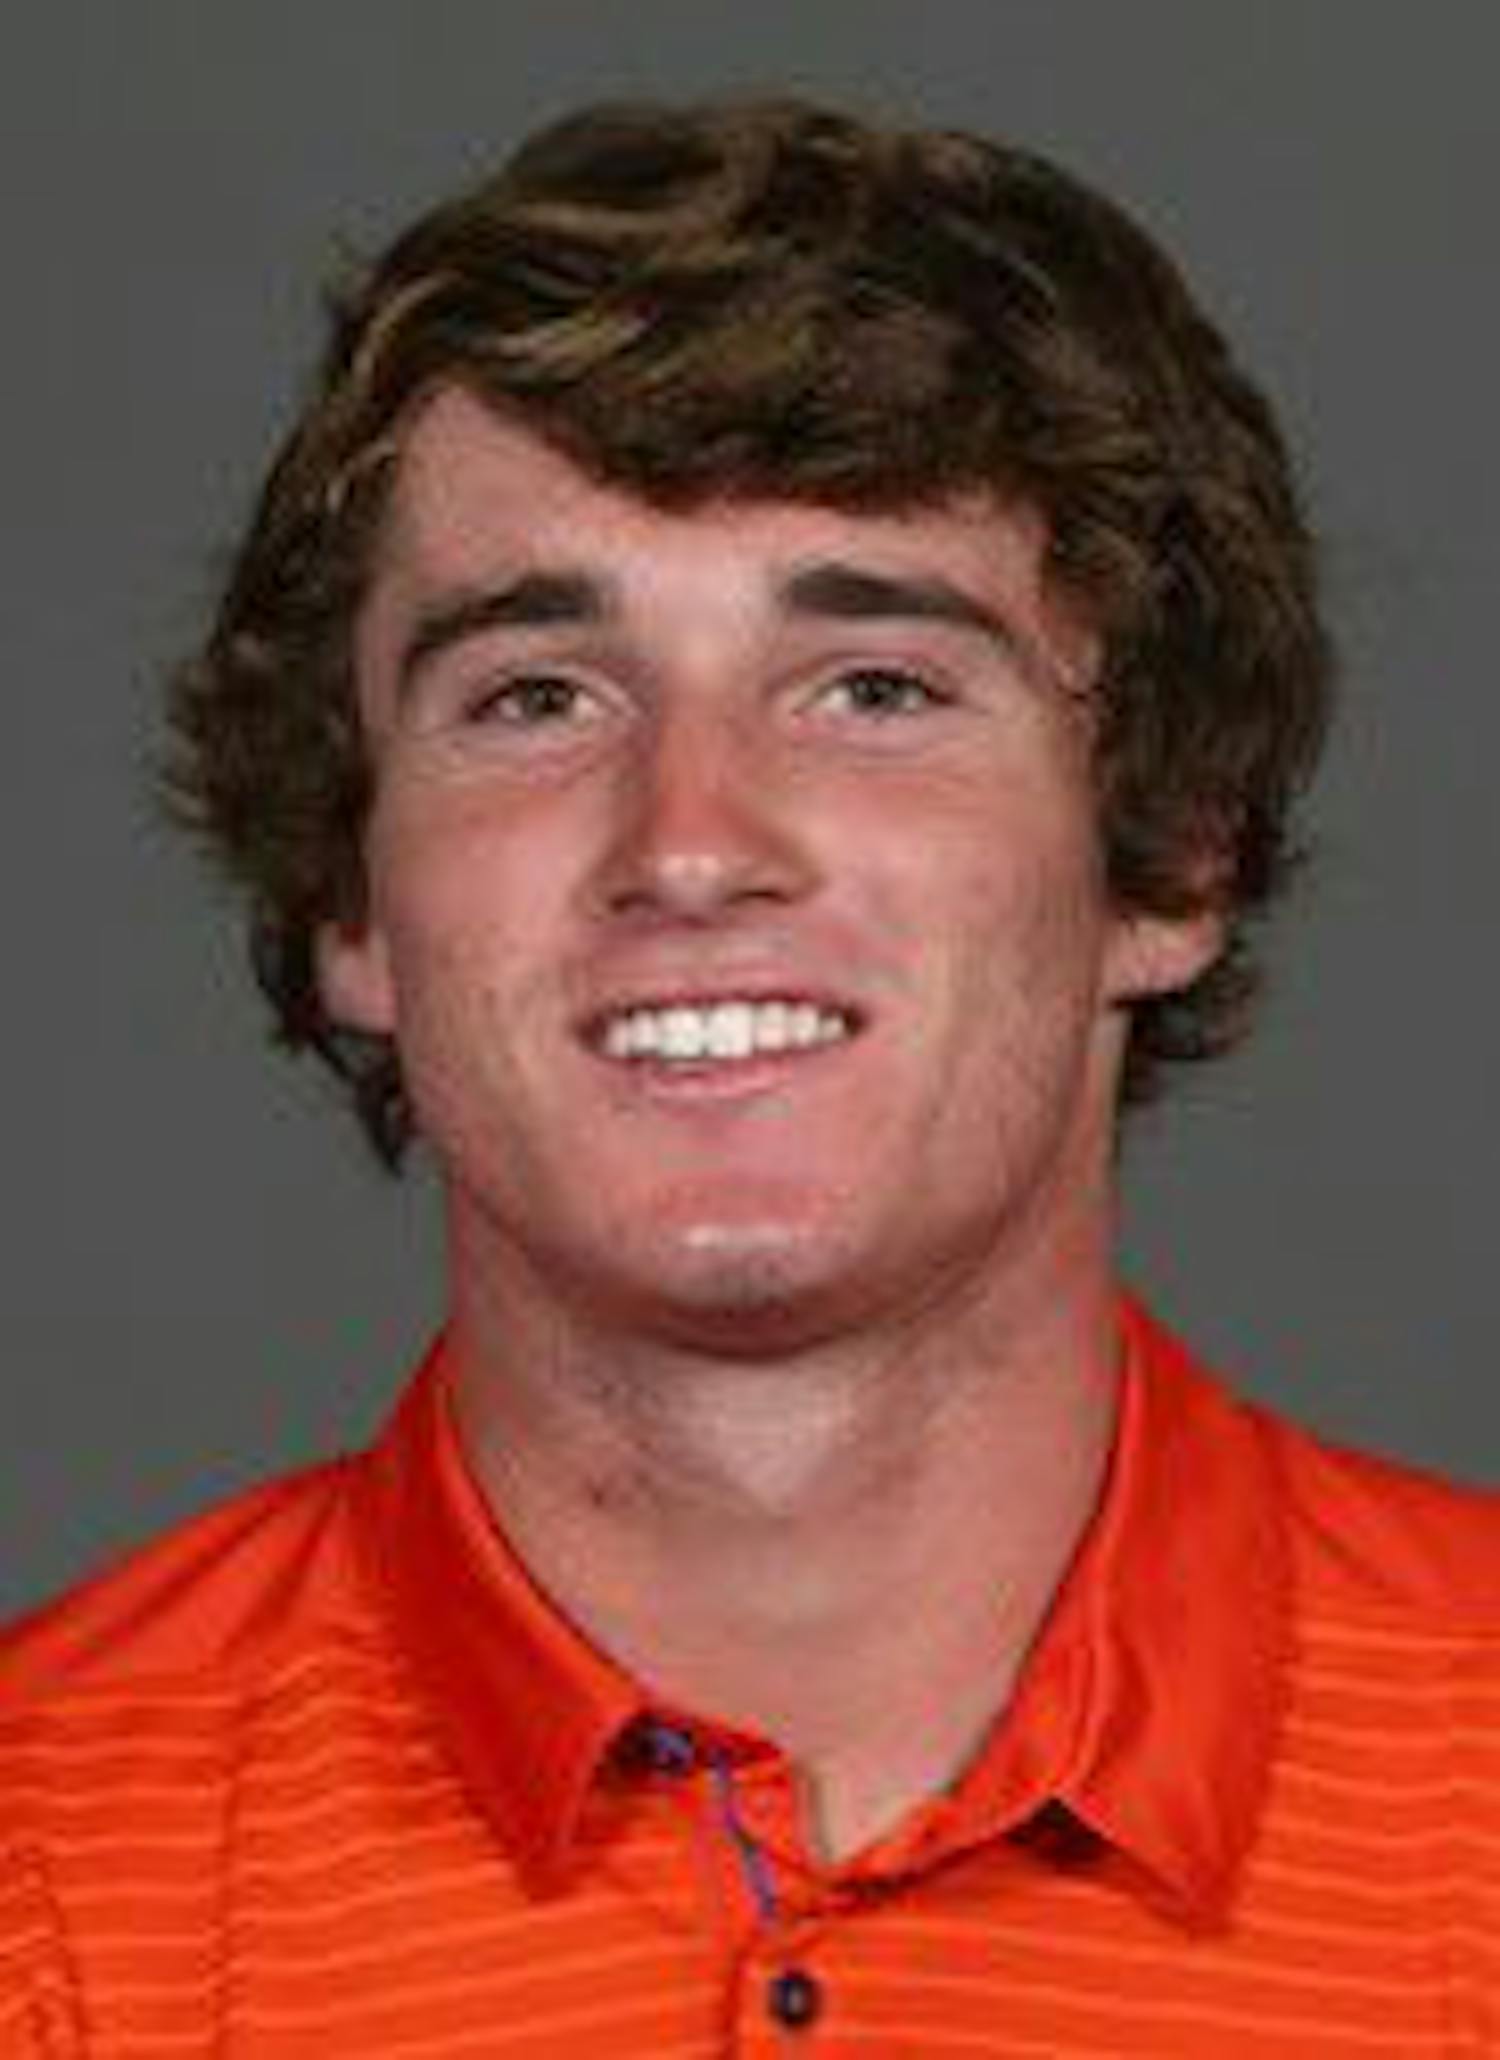 Oliver Crawford started his career at UF with two wins at the ITA Regional Championships in Atlanta.&nbsp;“Great to see Oliver play his first collegiate matches,” coach Bryan Shelton said. “I am sure he will get better with each match he plays.”